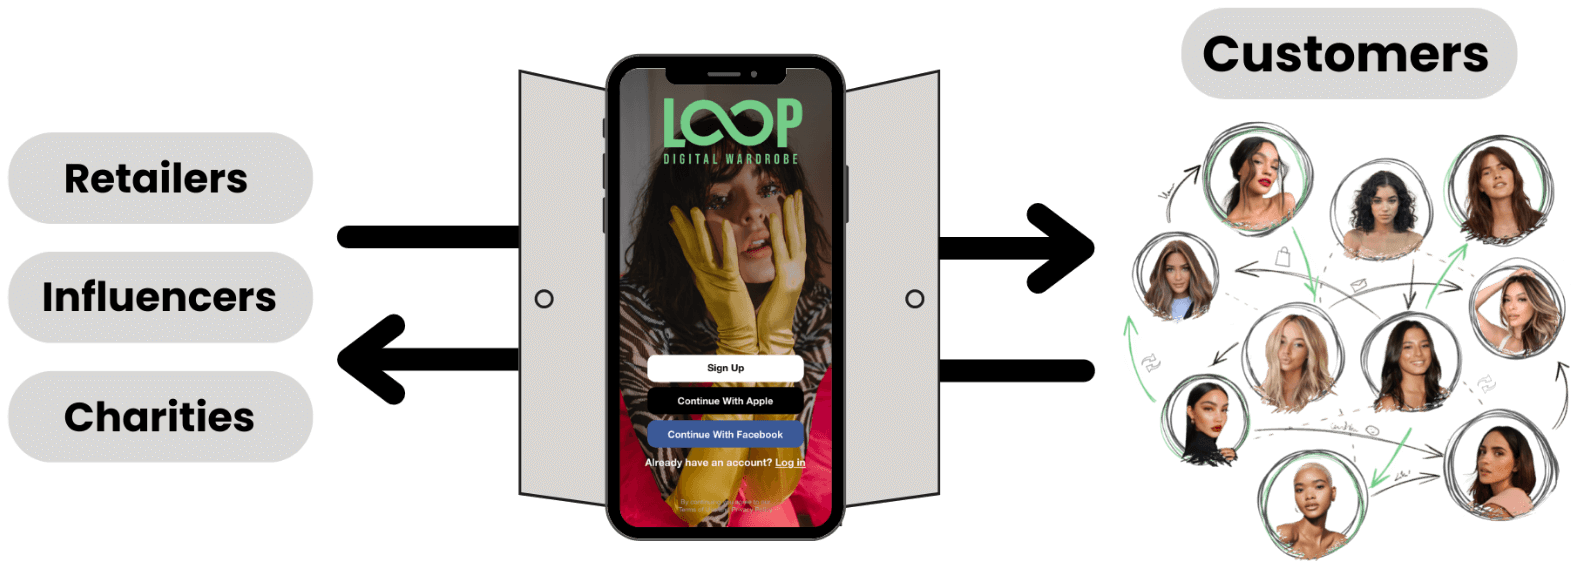 Loop is access to consumers wardrobes